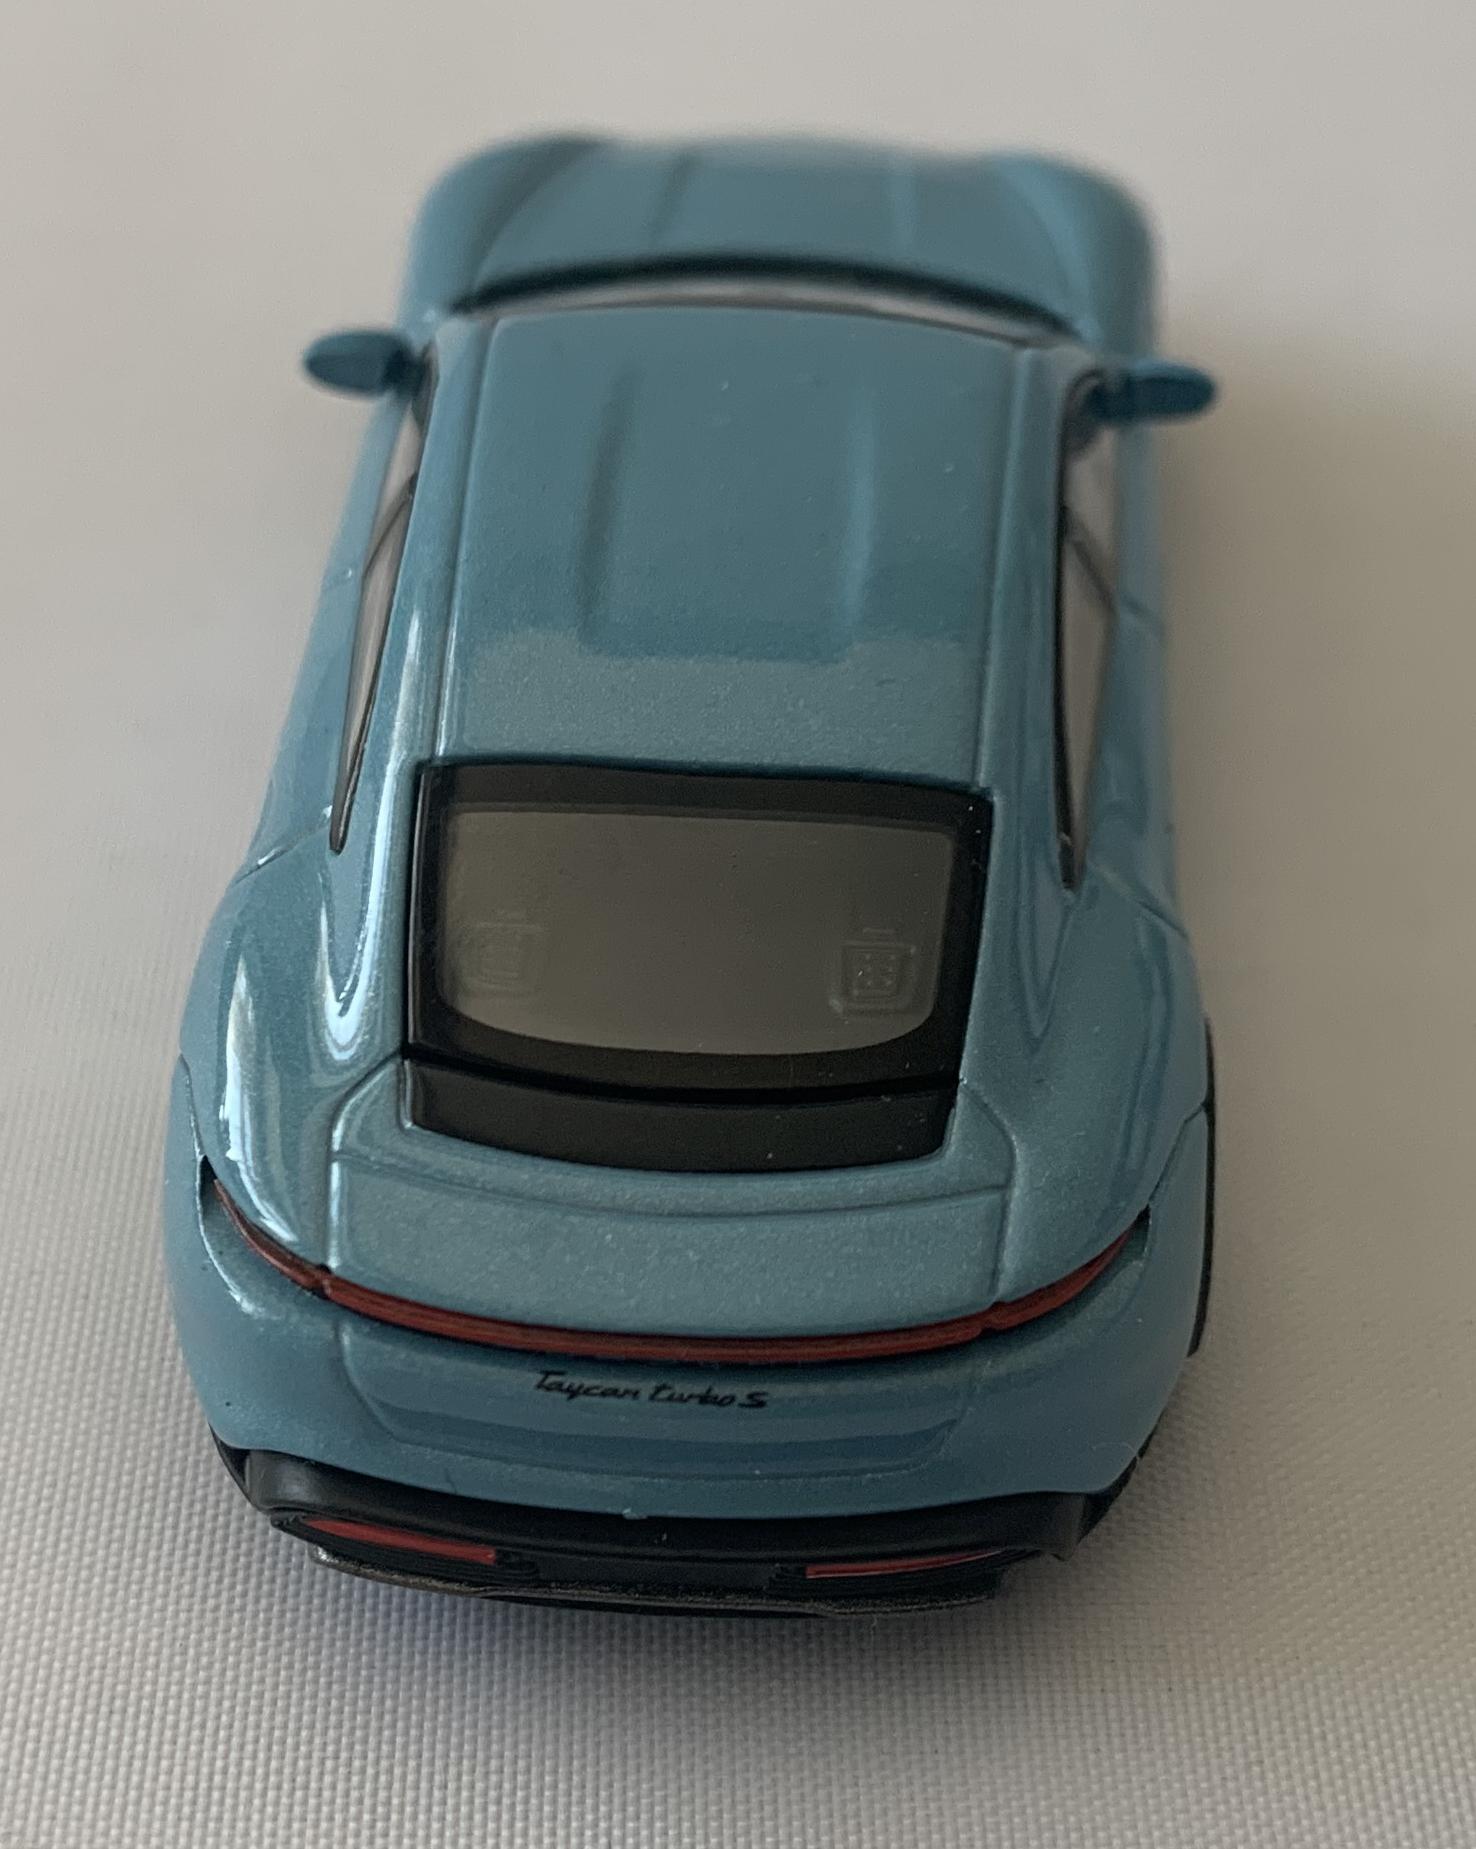 cated and sits on the front bonnet with the lettering Porsche Taycan Turbo S on the rear.  The Porsche badge also extends to the wheel hubs.  A good reproduction of the Porsche Taycan Turbo S with detail throughout, all authentically recreated. The model is presented in a box, the car is approx. 8 cm long and the box is 10 cm long